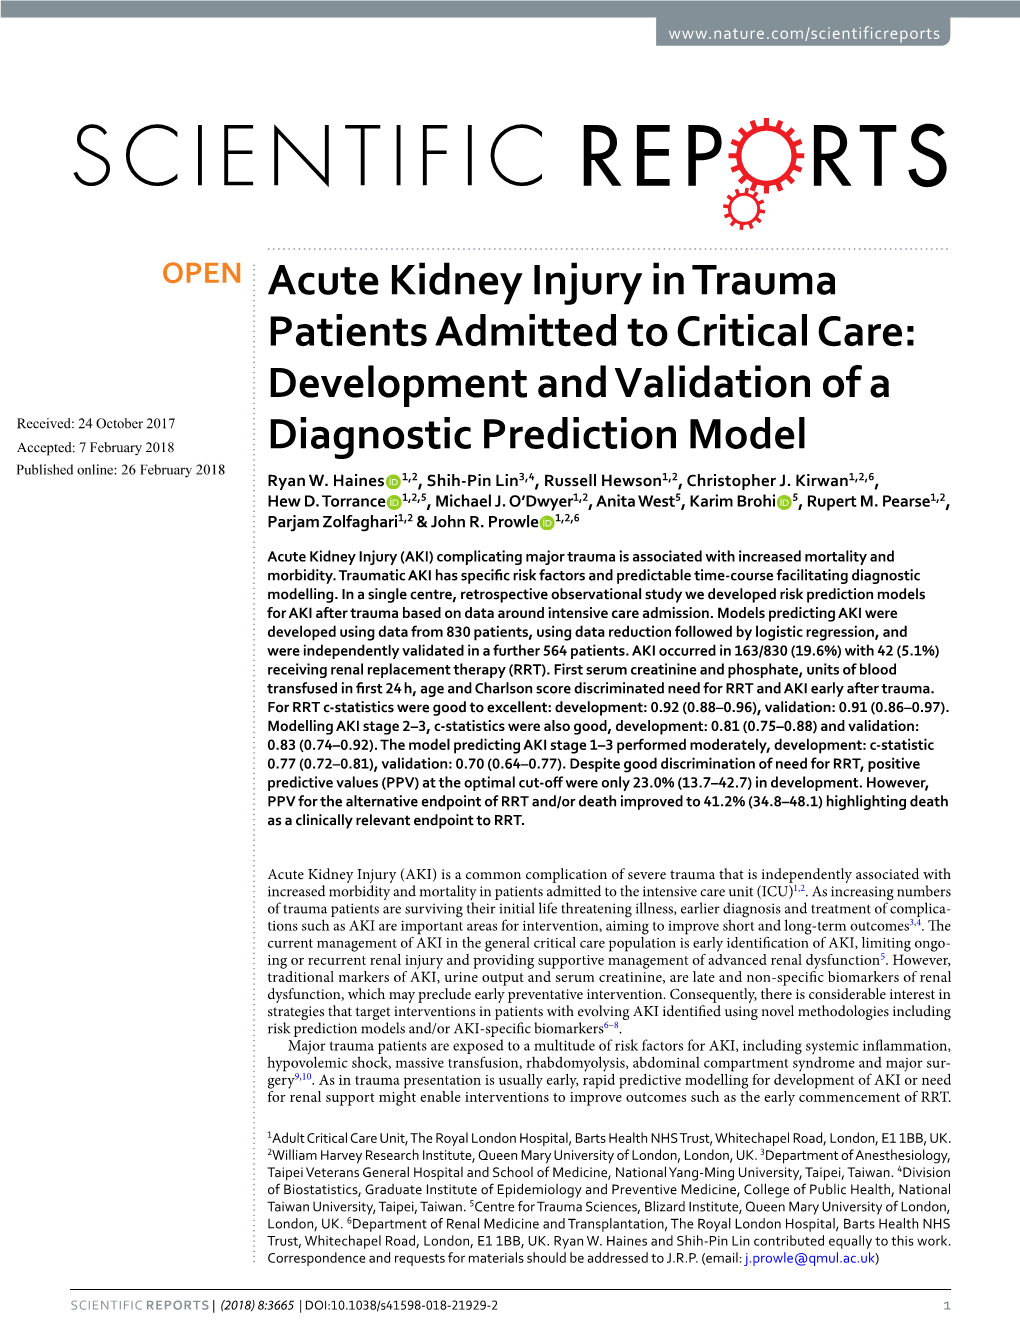 Acute Kidney Injury in Trauma Patients Admitted to Critical Care